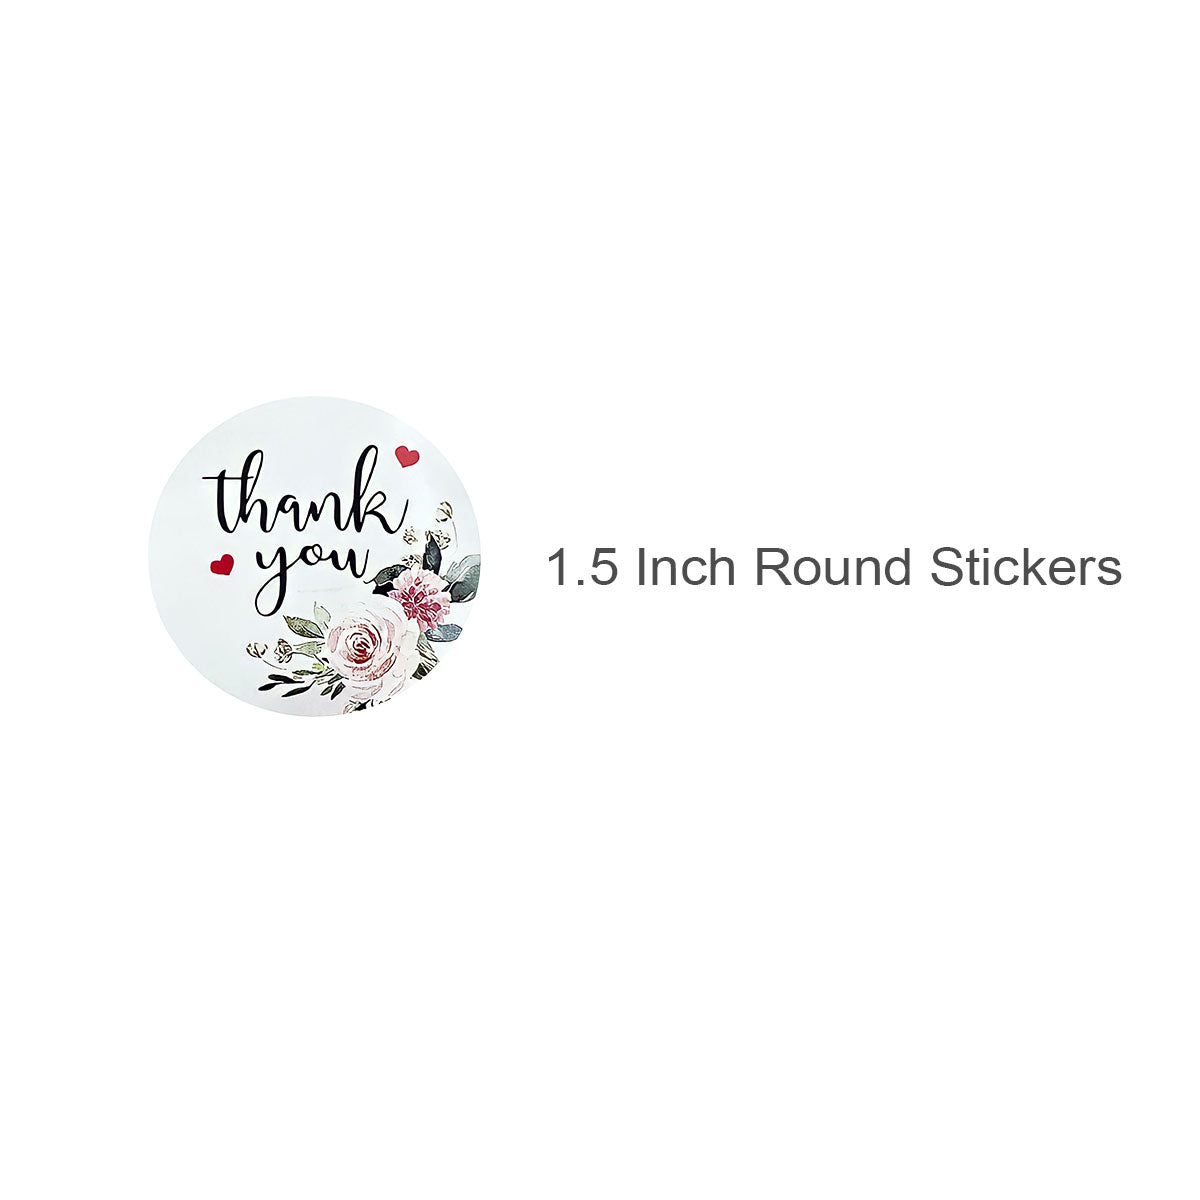 Wrapables 1.5" / 2" Thank You Stickers Roll, Sealing Stickers and Labels for Boxes, Envelopes, Bags, Small Businesses, Weddings, Parties (500pcs)